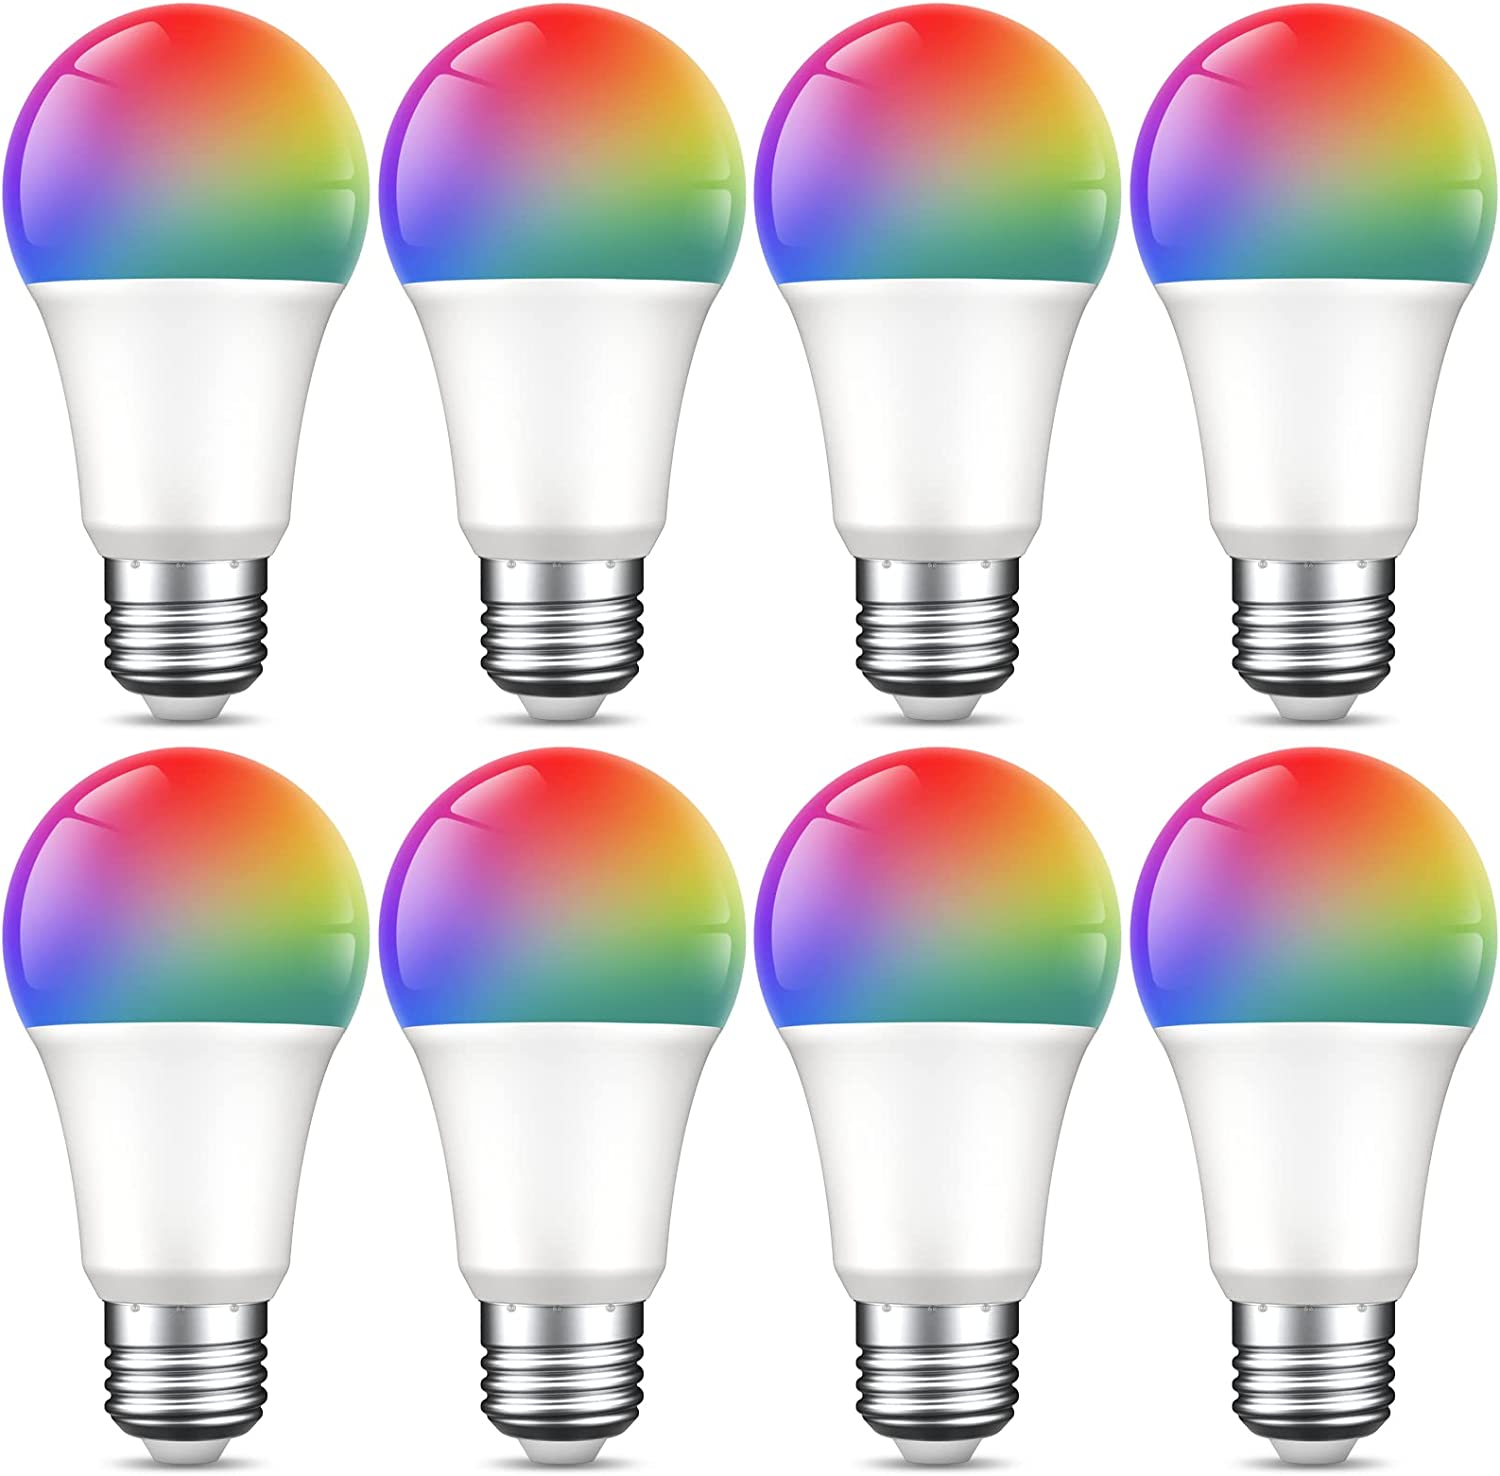 Ghome Smart Light Bulbs, A19 E26 Color Changing Led Bulb Works with Alexa, Google Home, App & Voice Control, 2.4Ghz WiFi Only, 800 Lumens,Dimmable RGB Warm White 2700K Smart Home Lighting, 4 Pack(WB4)